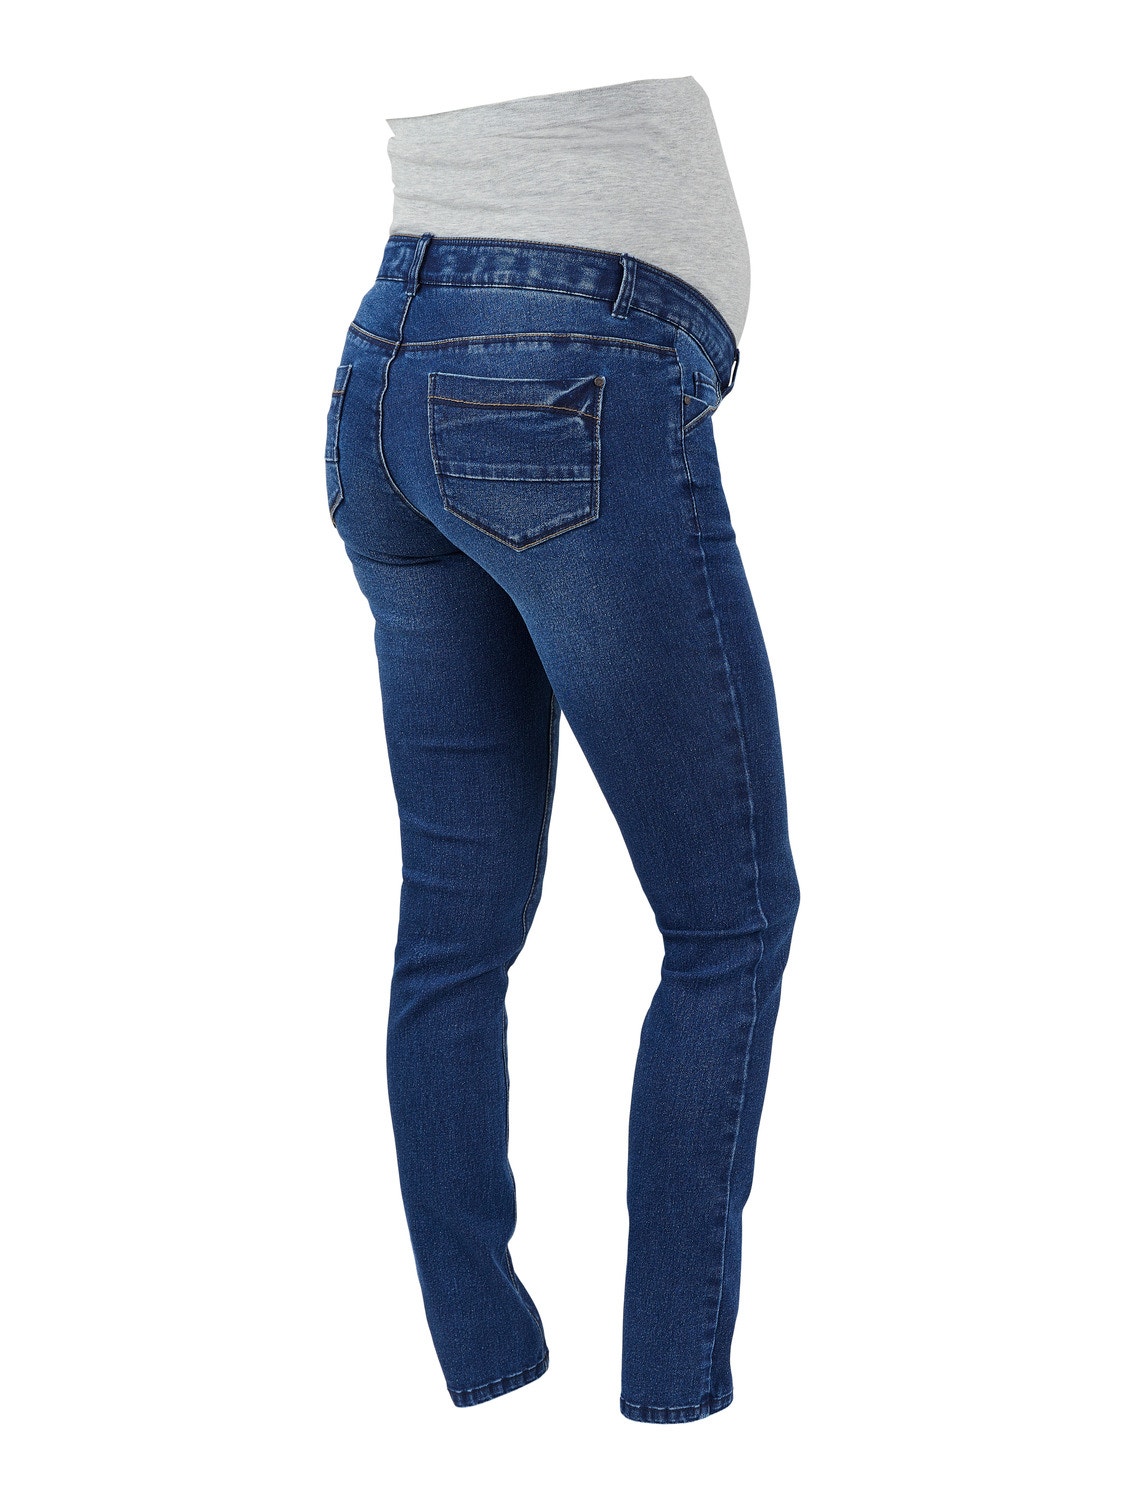 BLOOMING MARVELLOUS Maternity Jeans Blue Black Over Bump Skinny Stretch BNWT